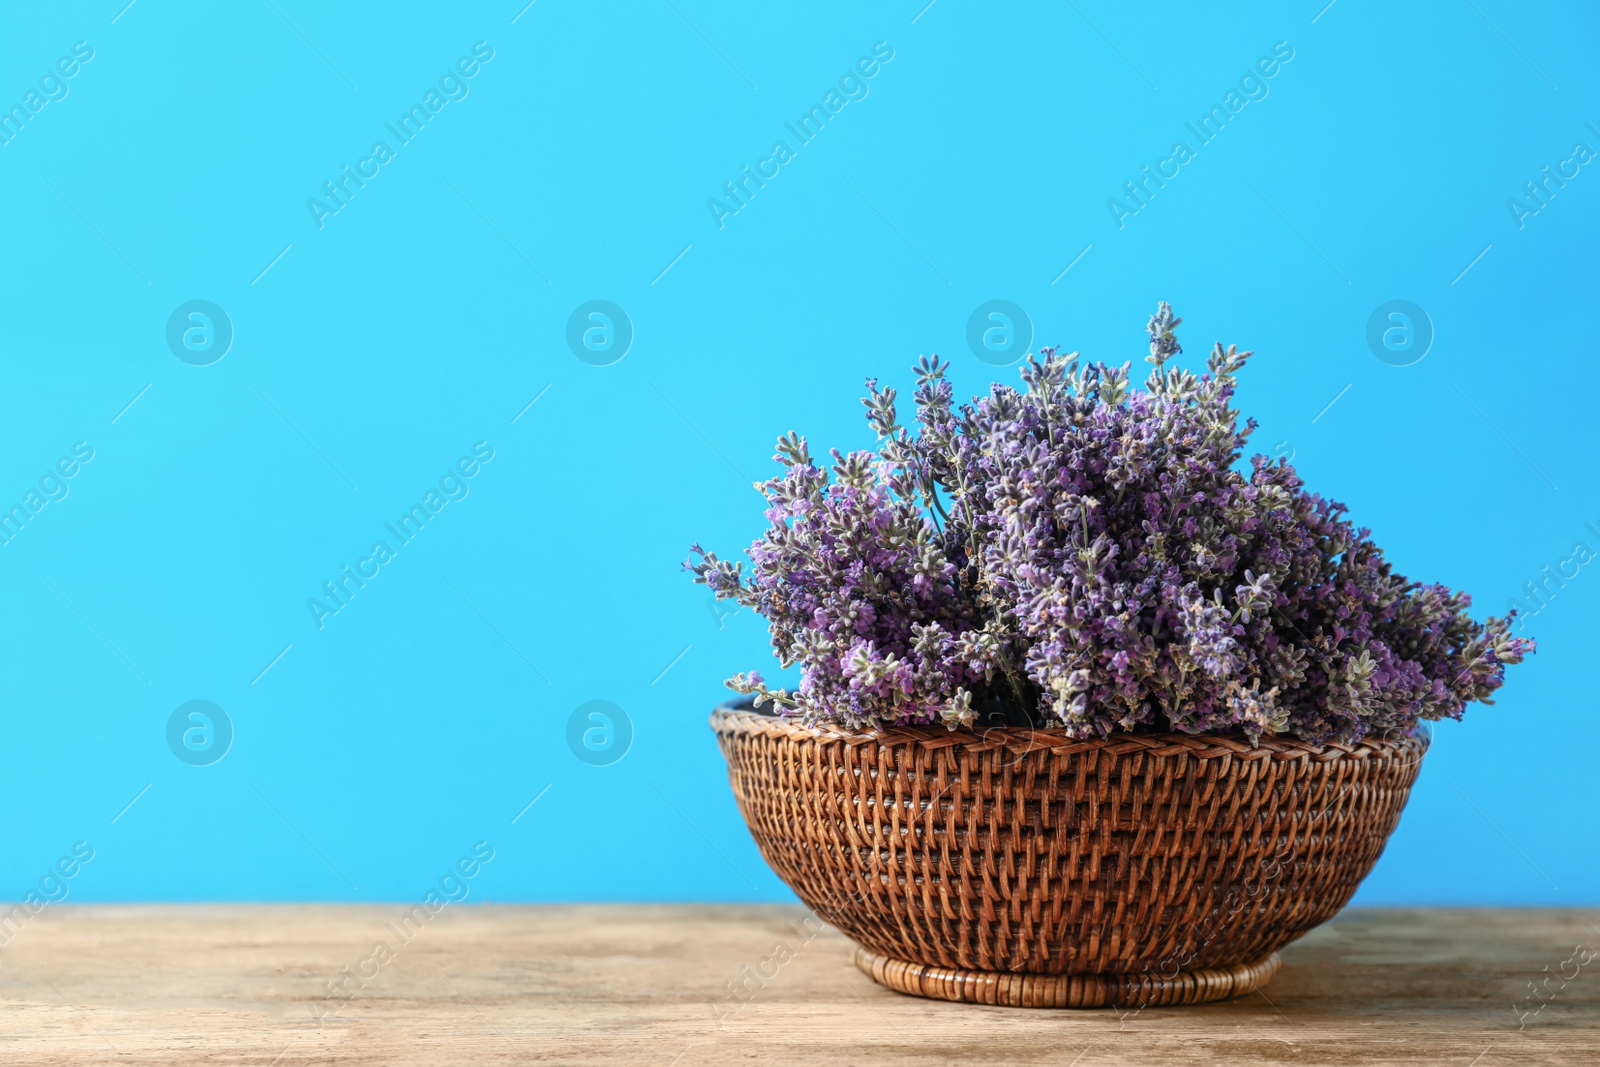 Photo of Basket with fresh lavender flowers on wooden table against blue background. Space for text